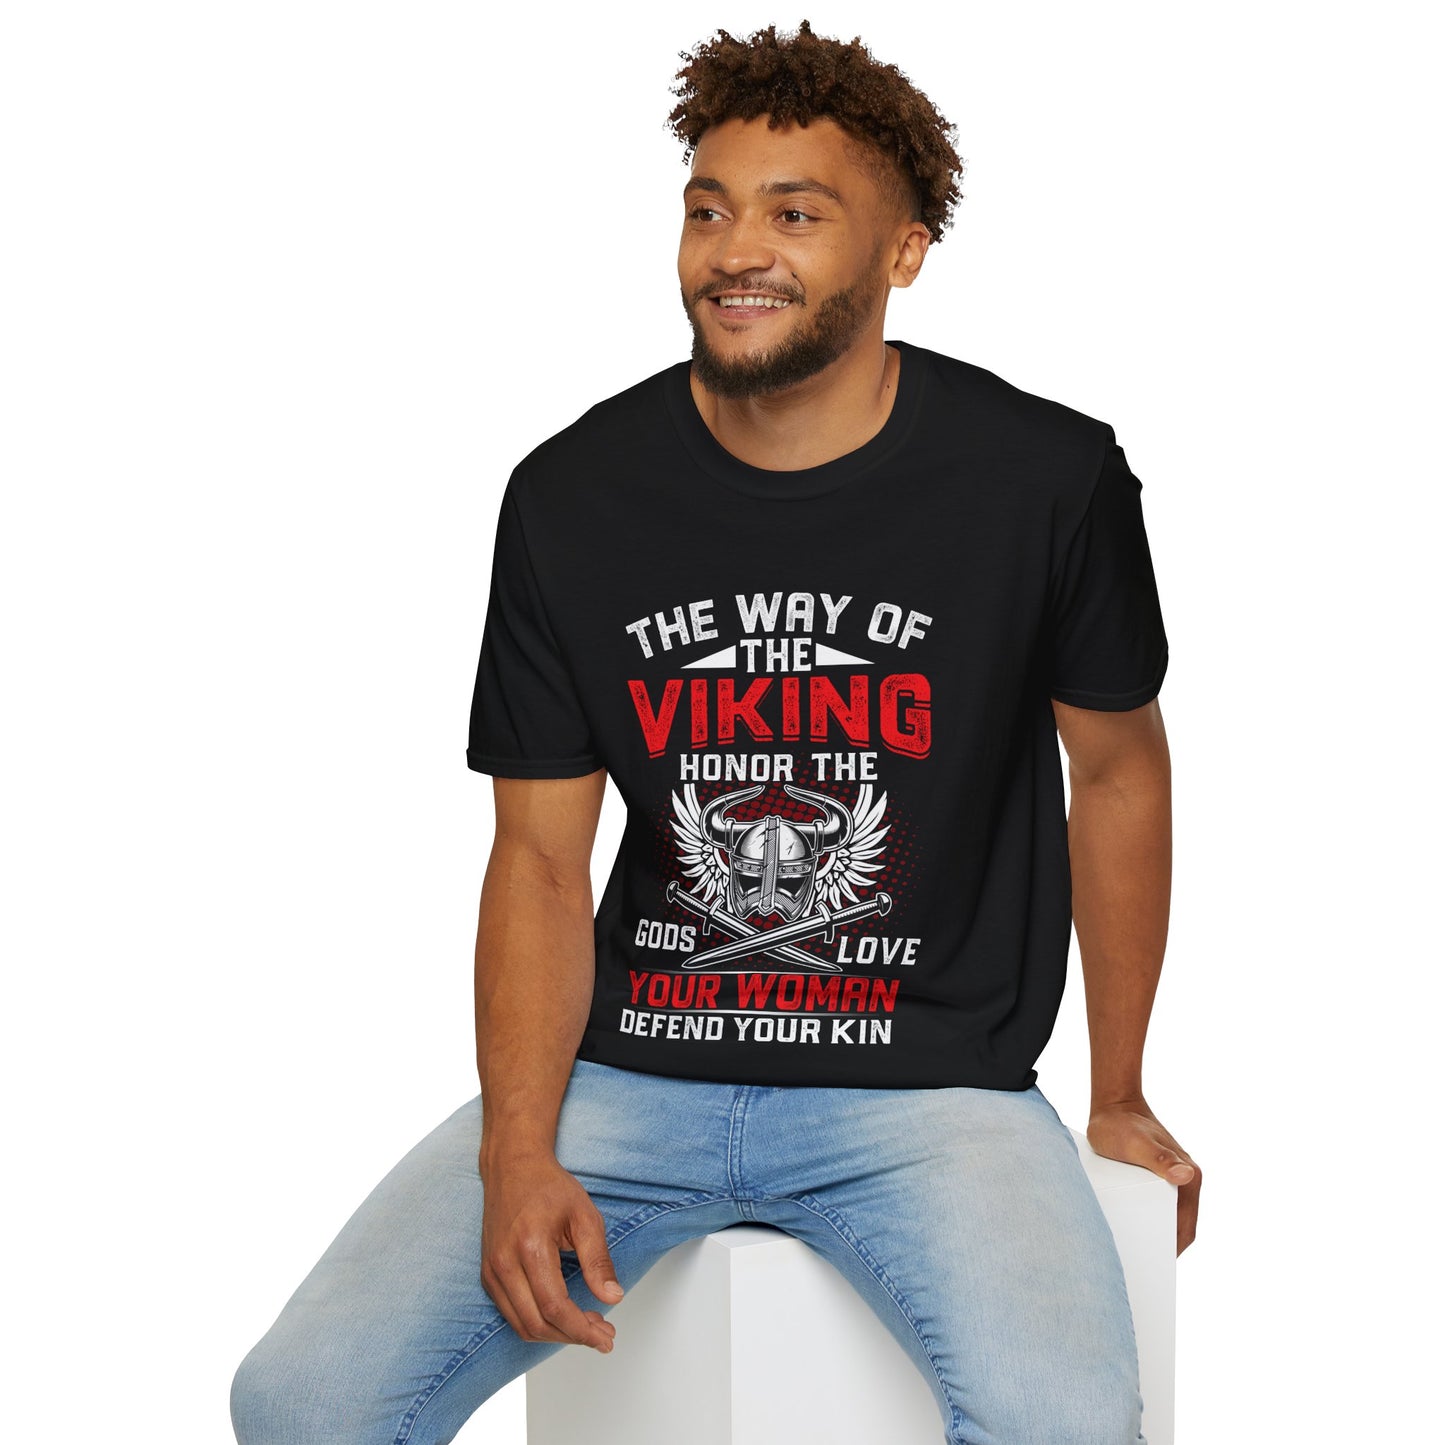 The Way Of The Viking- Honor The Gods Love Your Woman Defend Your Kin T-Shirt